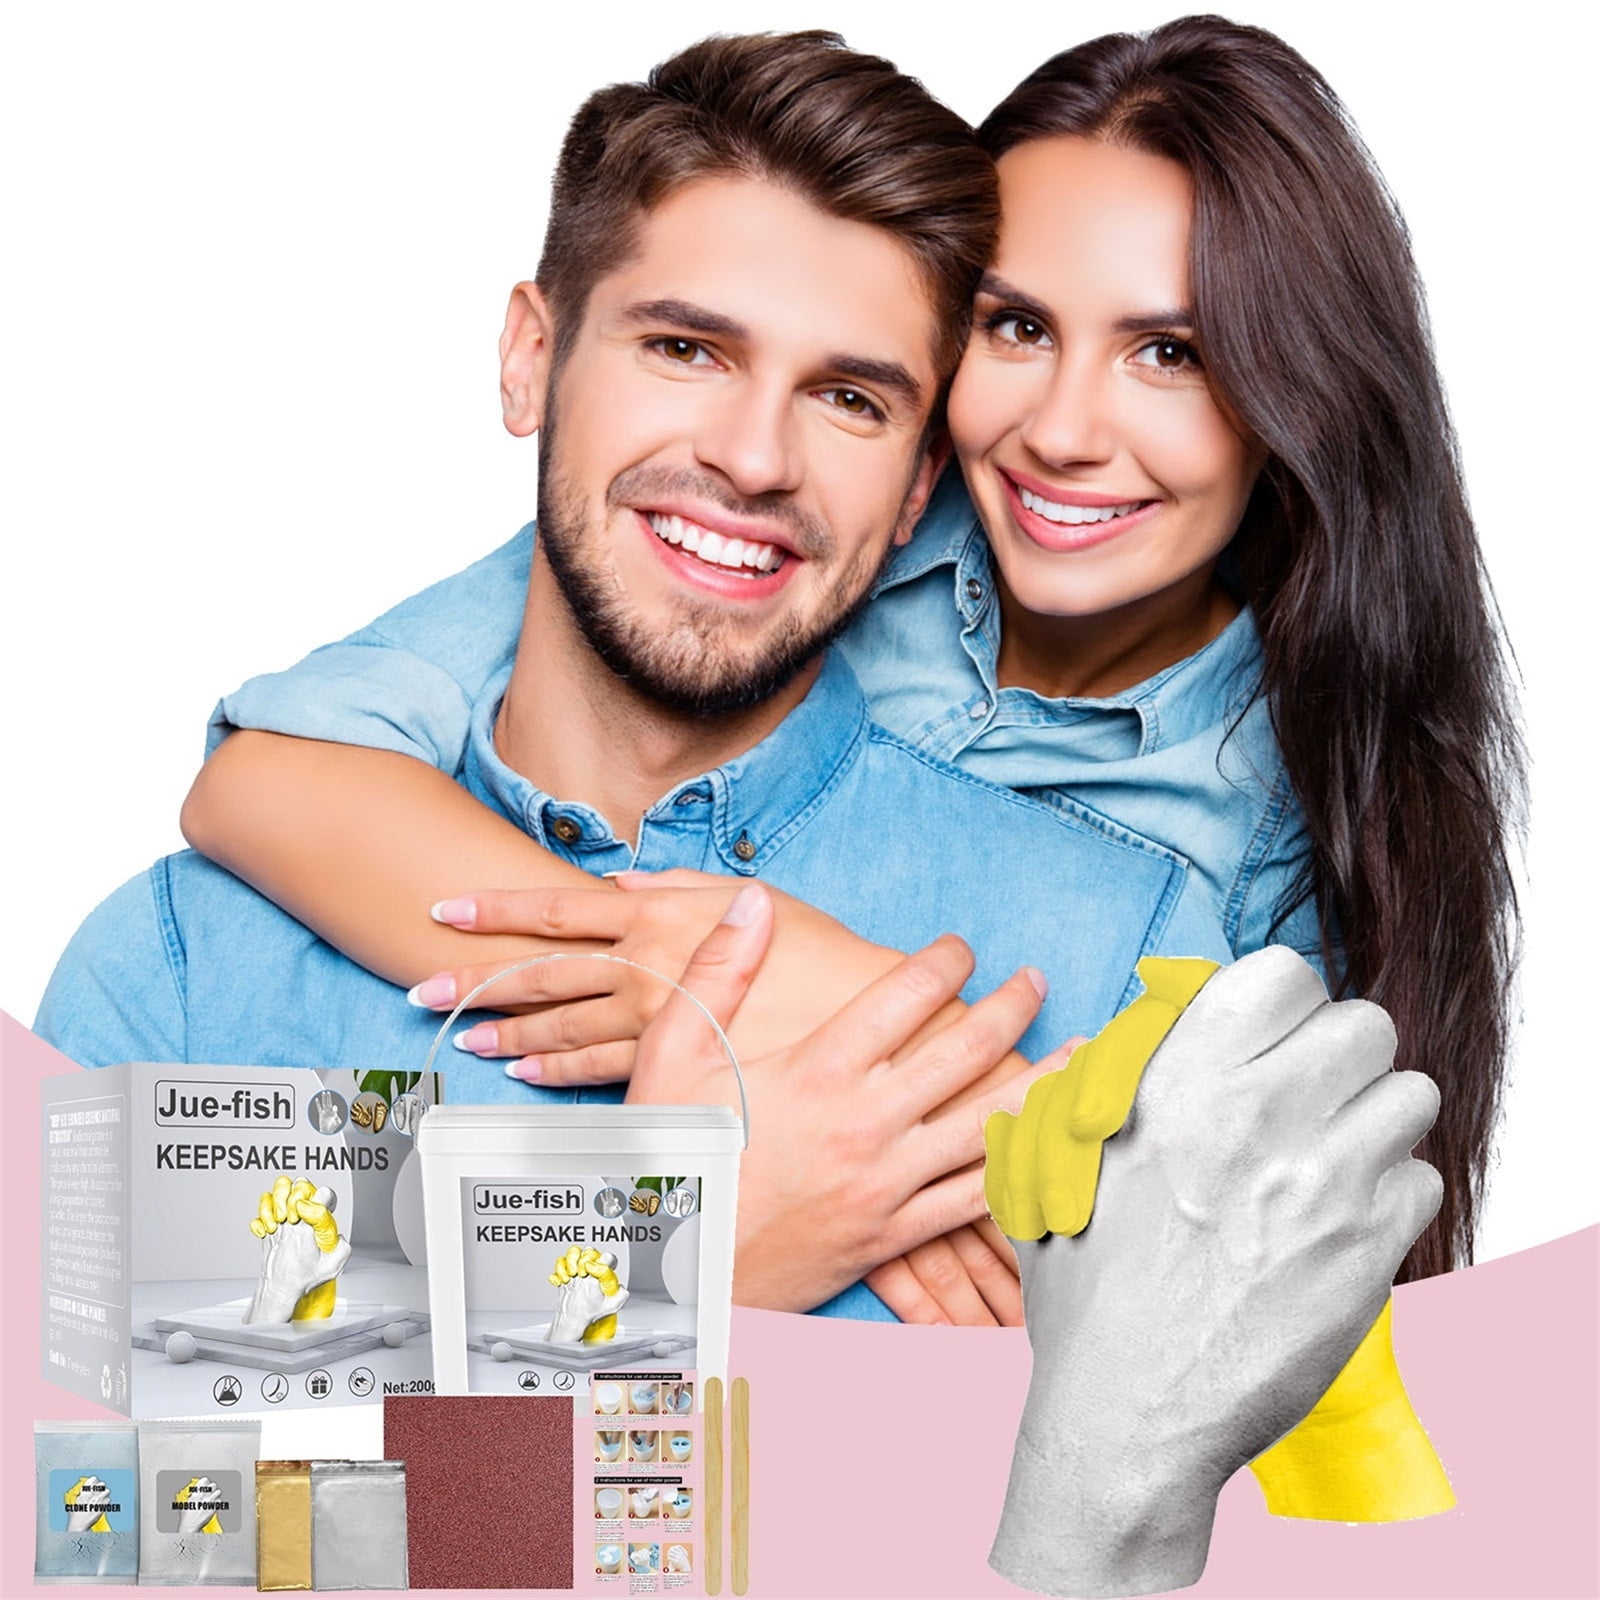 Relax Love Hand Casting Kit Plaster Hand Mold Kit DIY Gift for Couples,Wedding, Anniversary, Family & Kids, Kids Unisex, Size: A Suit